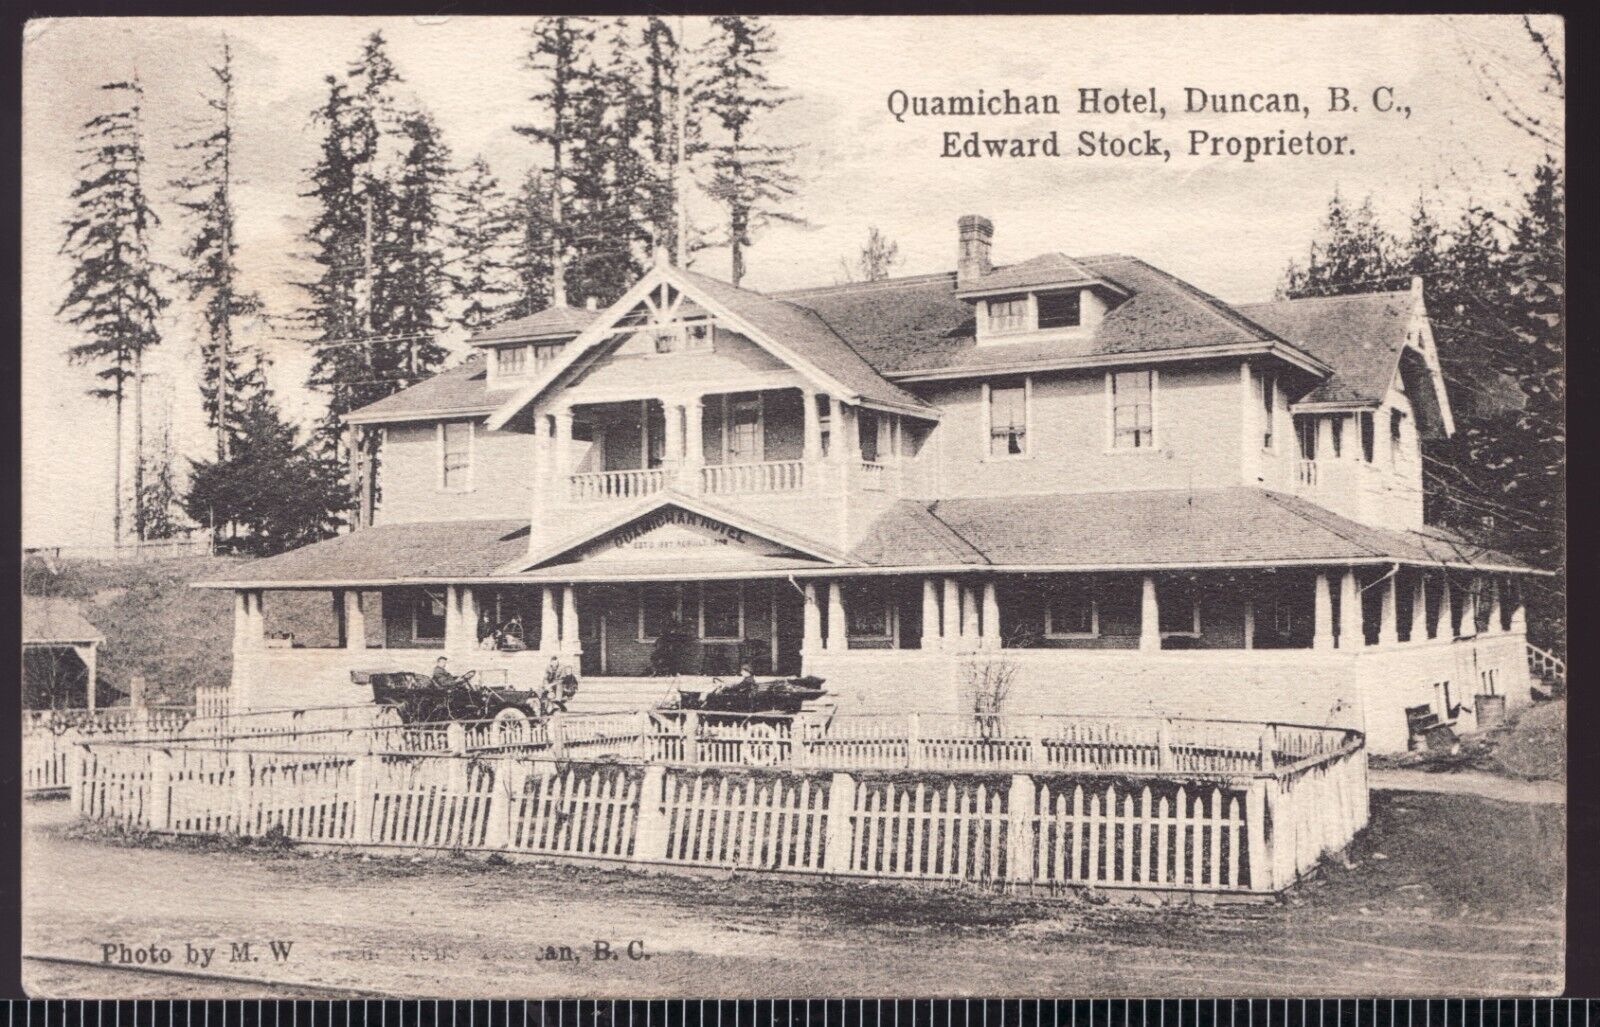 1912 RPPC Postcard - posted - Quamichan Hotel with automobiles, Duncan B.C.